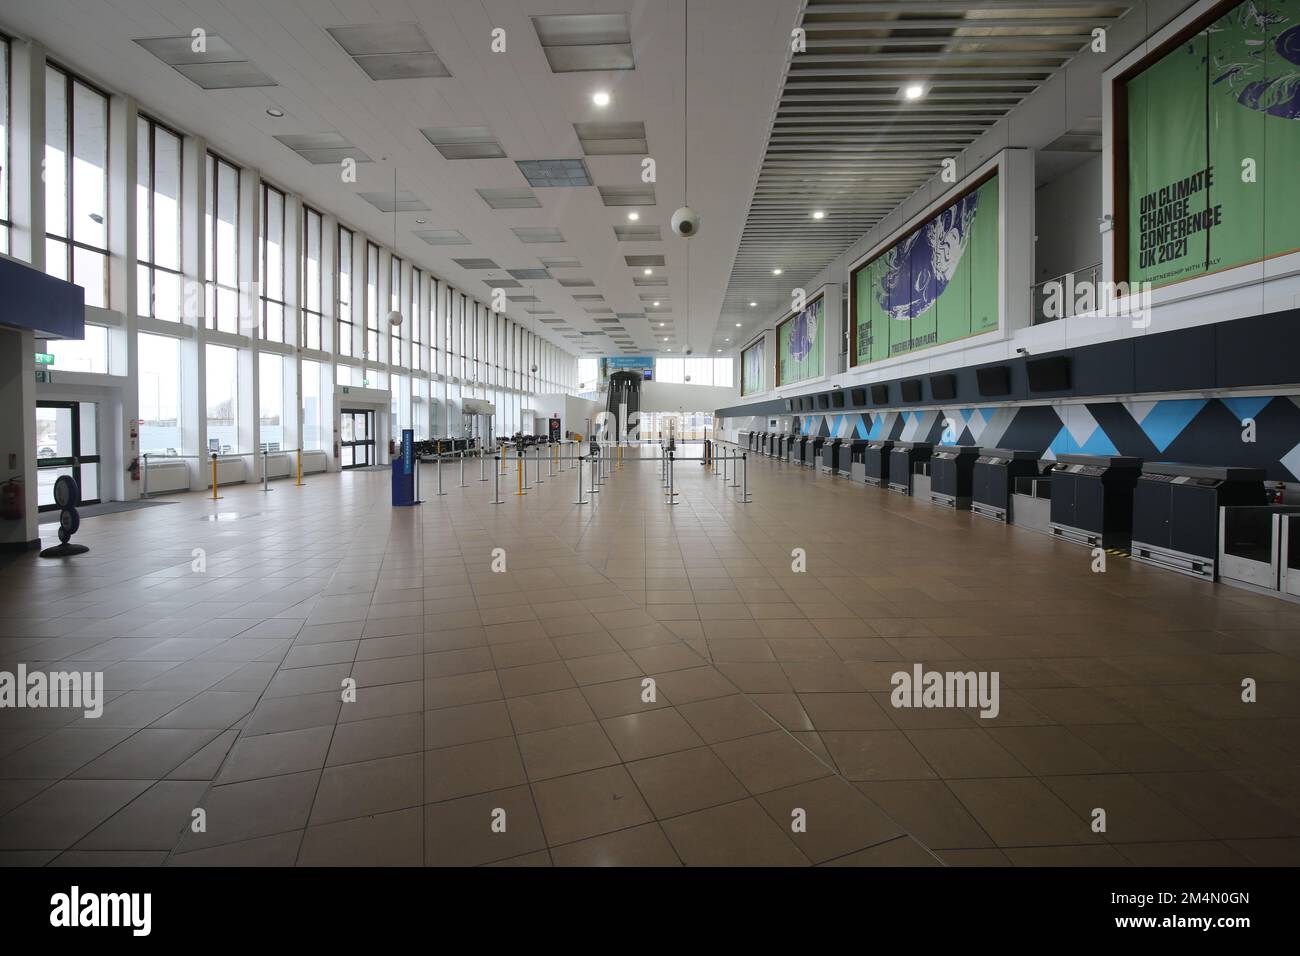 Glasgow Prestwick Airport. Ayrshire Scotland. March 2022.   The deserted terminal building concourse awaiting passengers and trade. Above check in desks is  hoardings promoting COP 26 still on view Stock Photo